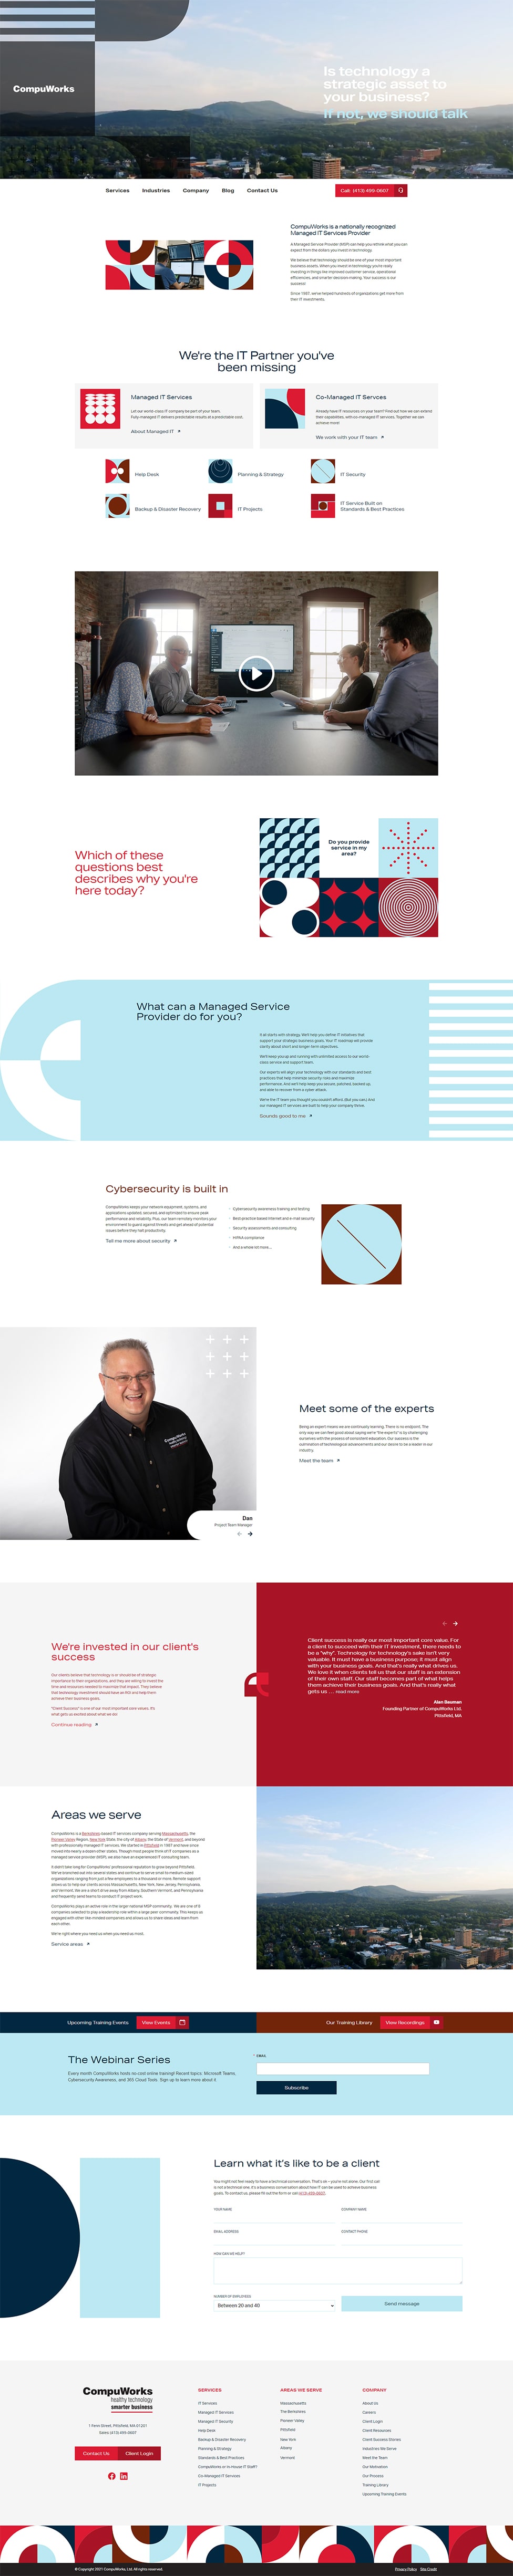 The completed website homepage for CompuWorks